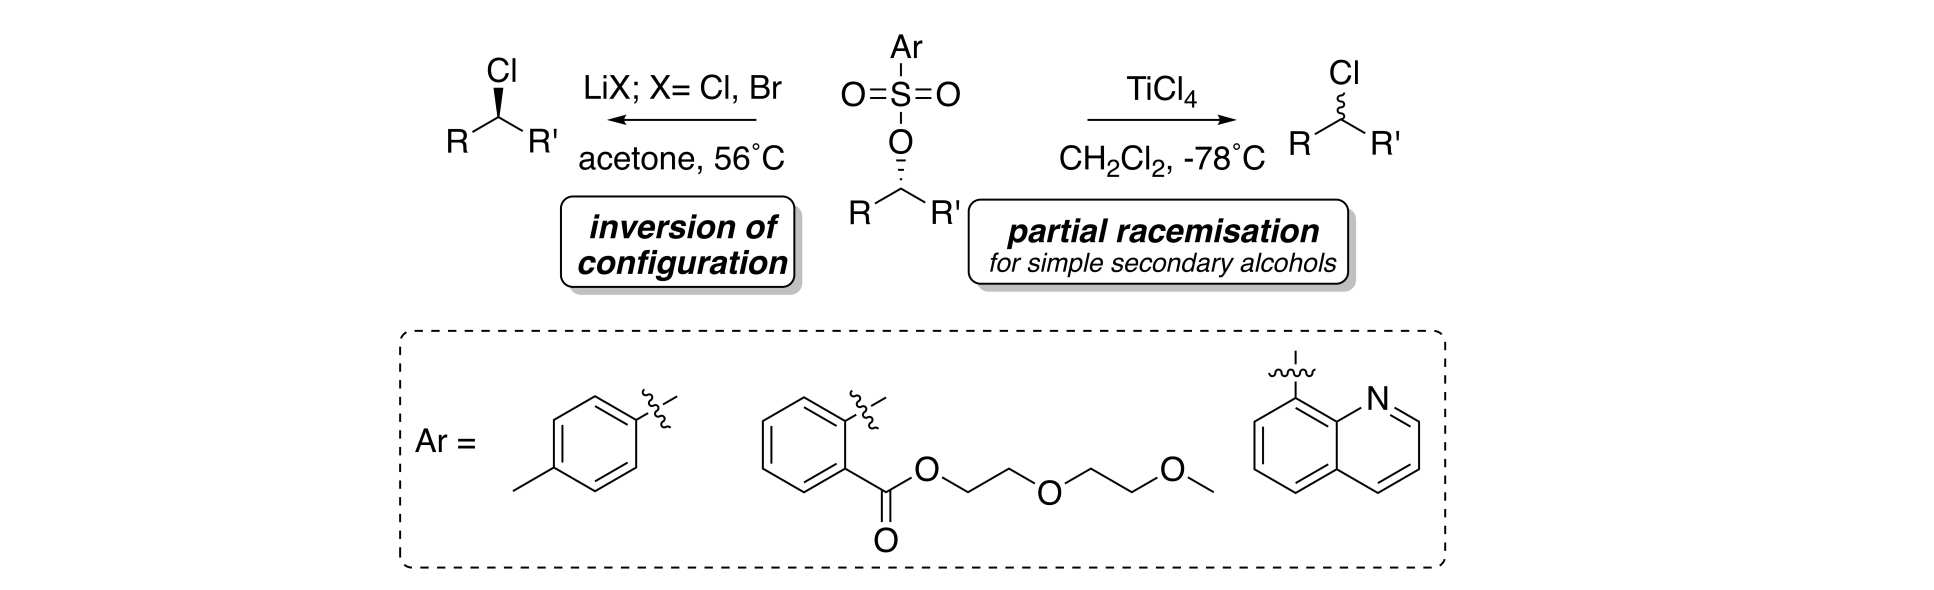 Clarification of the Stereochemical Course of Nucleophilic Substitution of Arylsulfonate-Based Nucleophile Assisting Leaving Groups